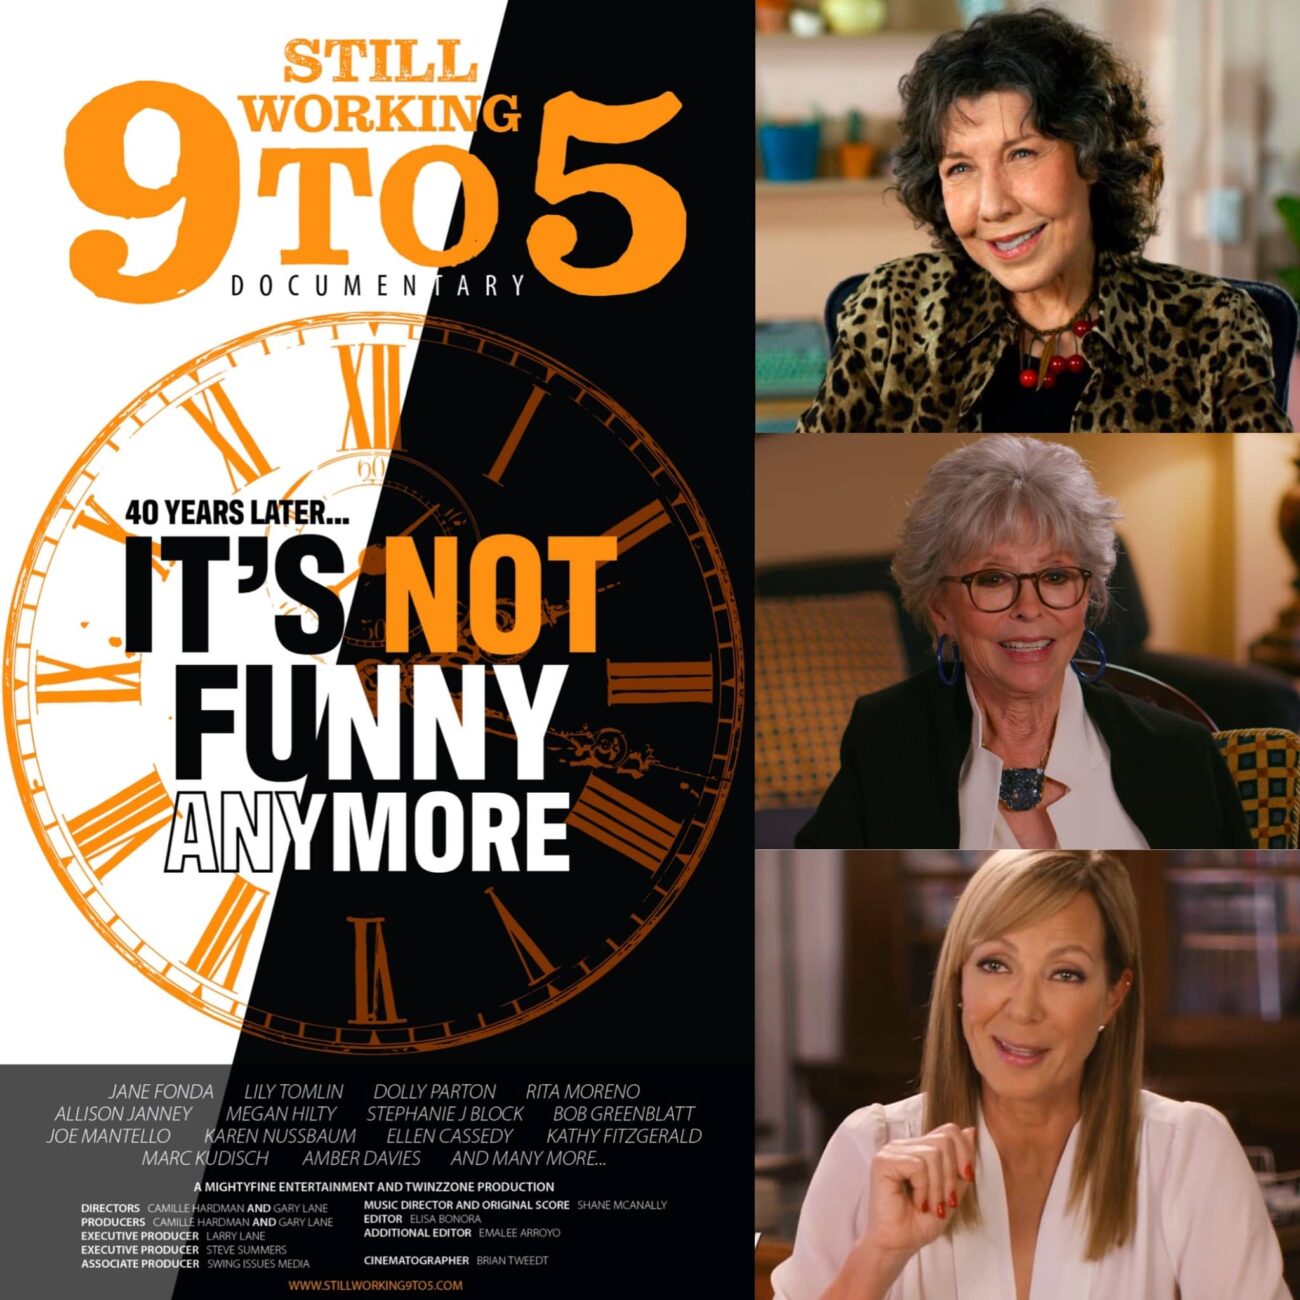 How much has changed in forty years? Take a trip through the history of the women's movement alongside Dolly Parton in 'Still Working 9 to 5'.